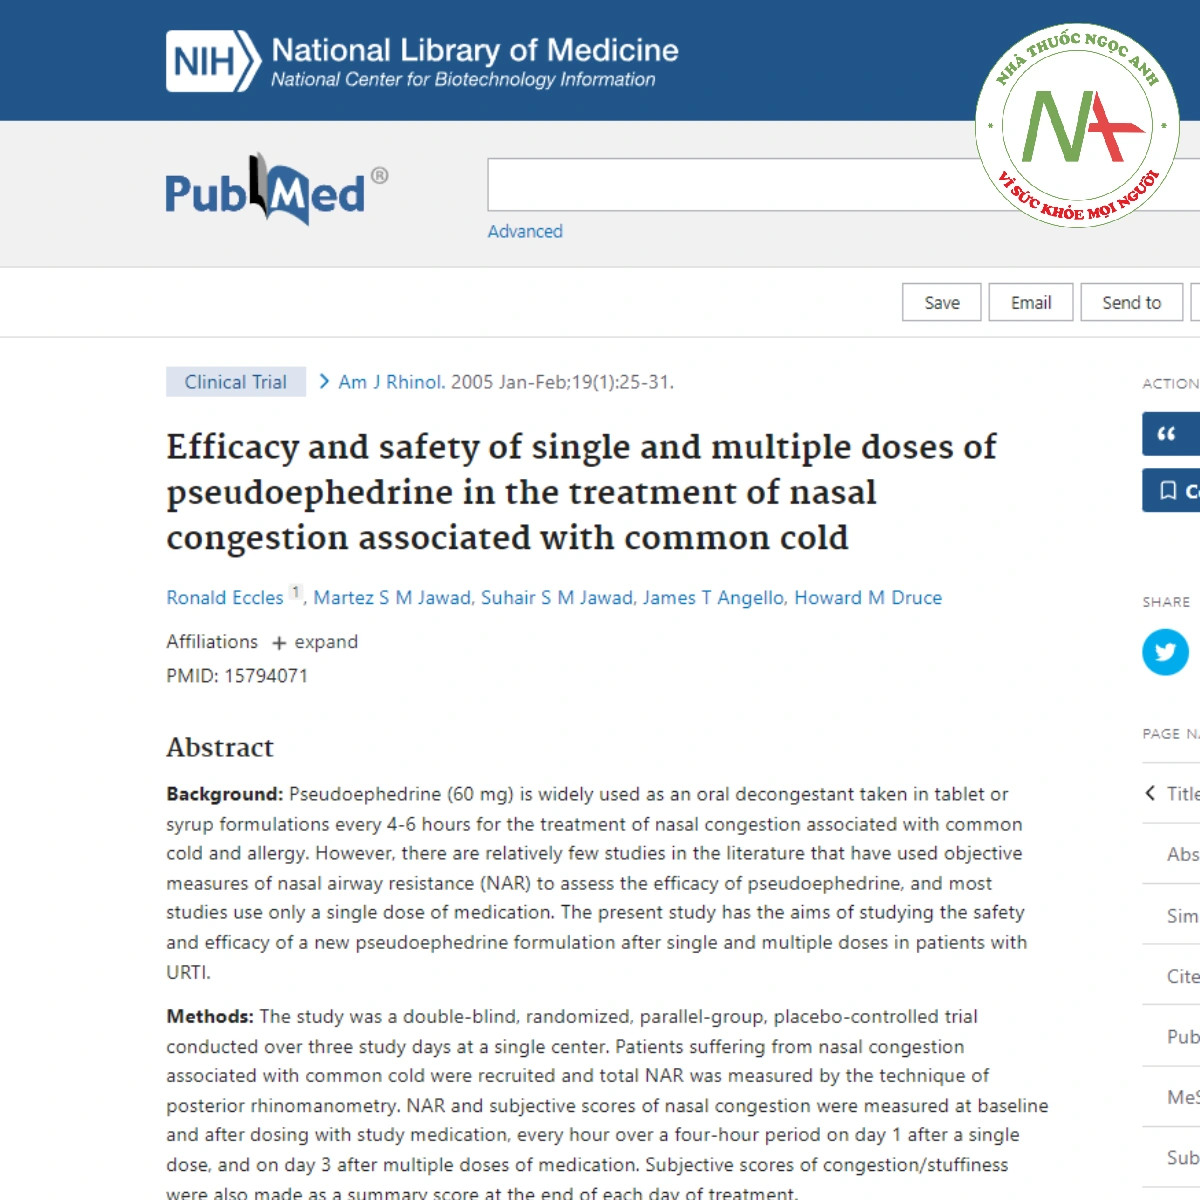 Efficacy and safety of single and multiple doses of pseudoephedrine in the treatment of nasal congestion associated with common cold